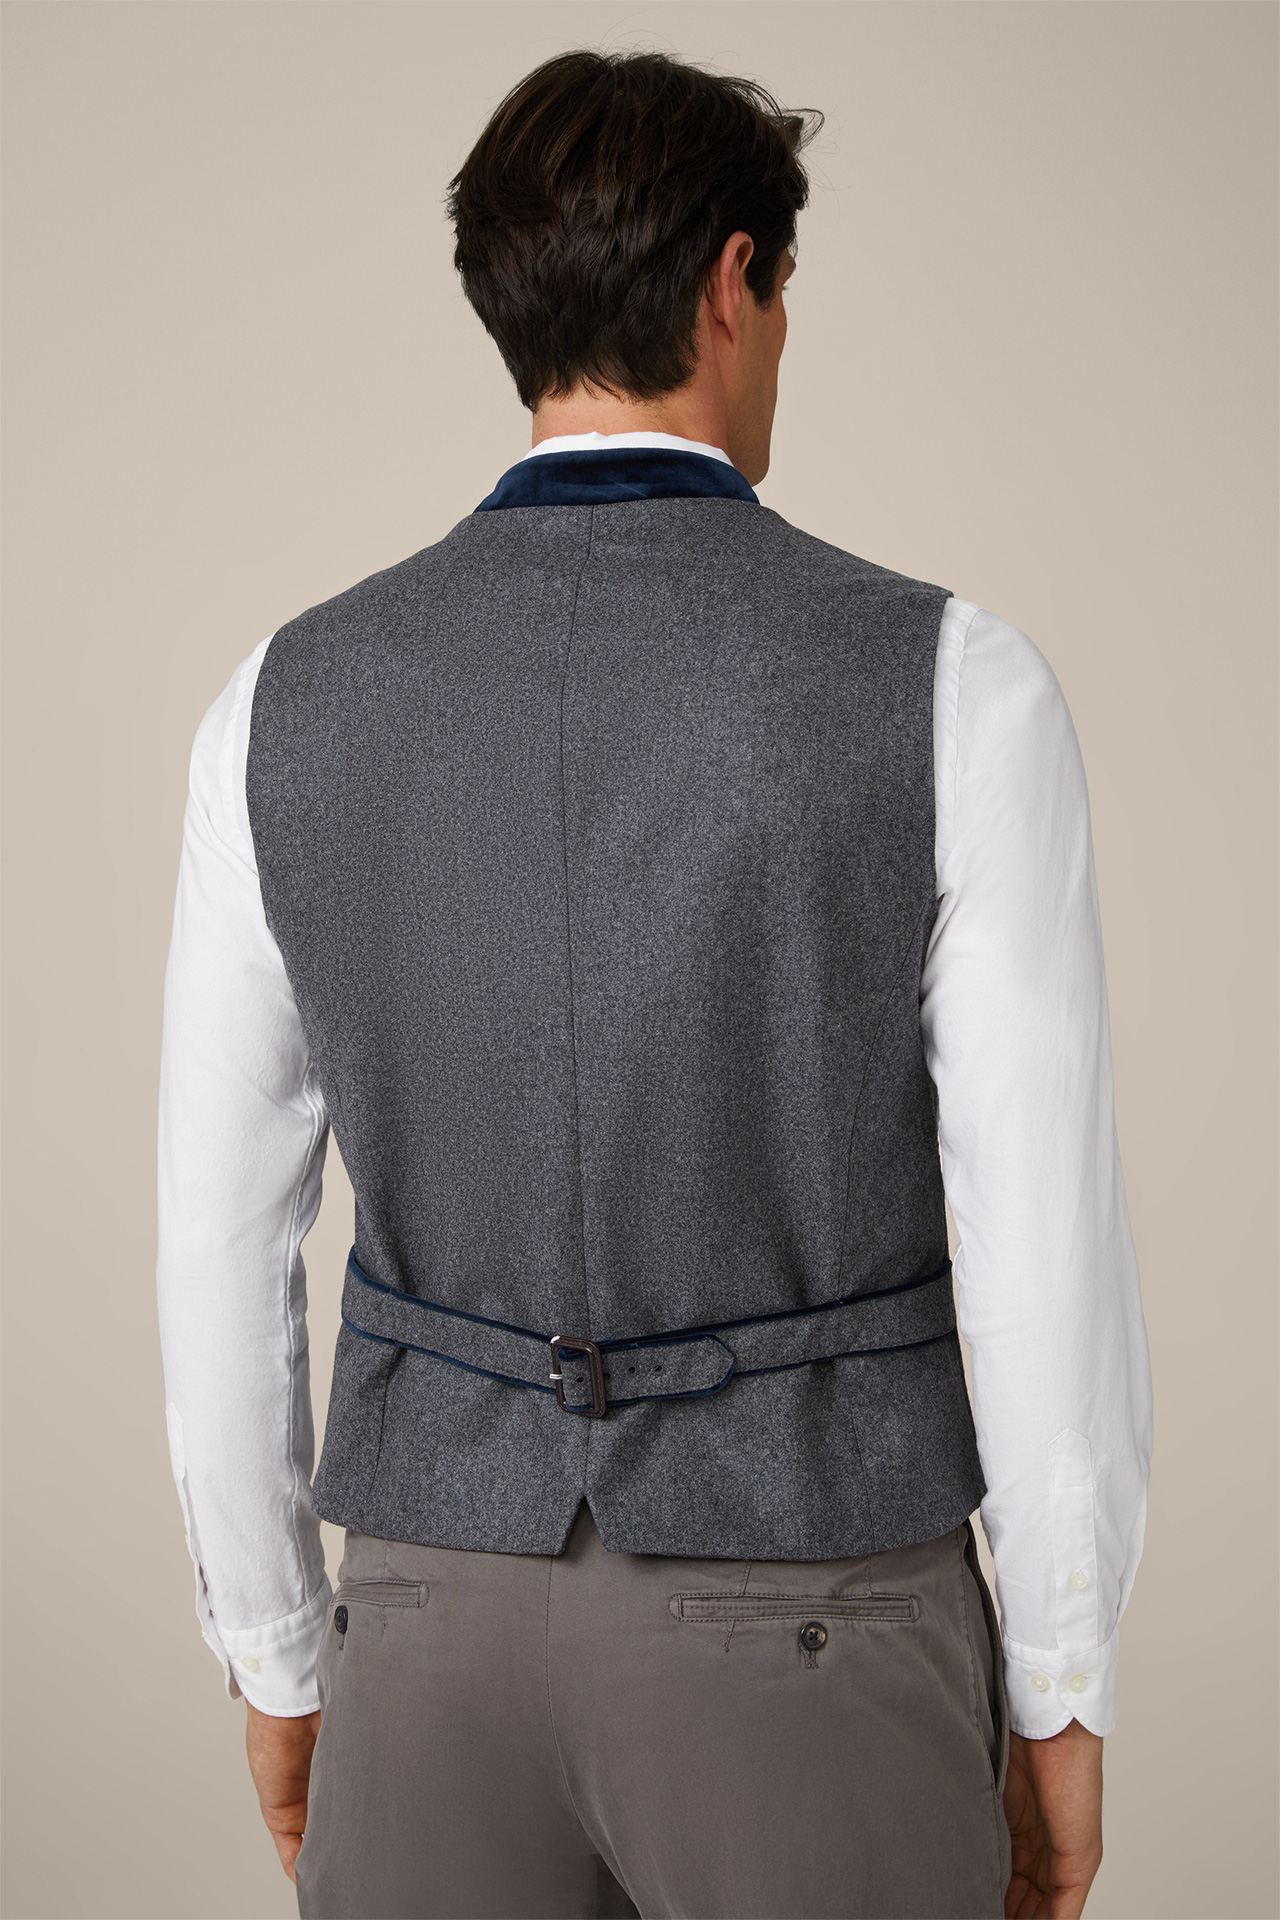 Au Traditional Waistcoat in Grey and Navy